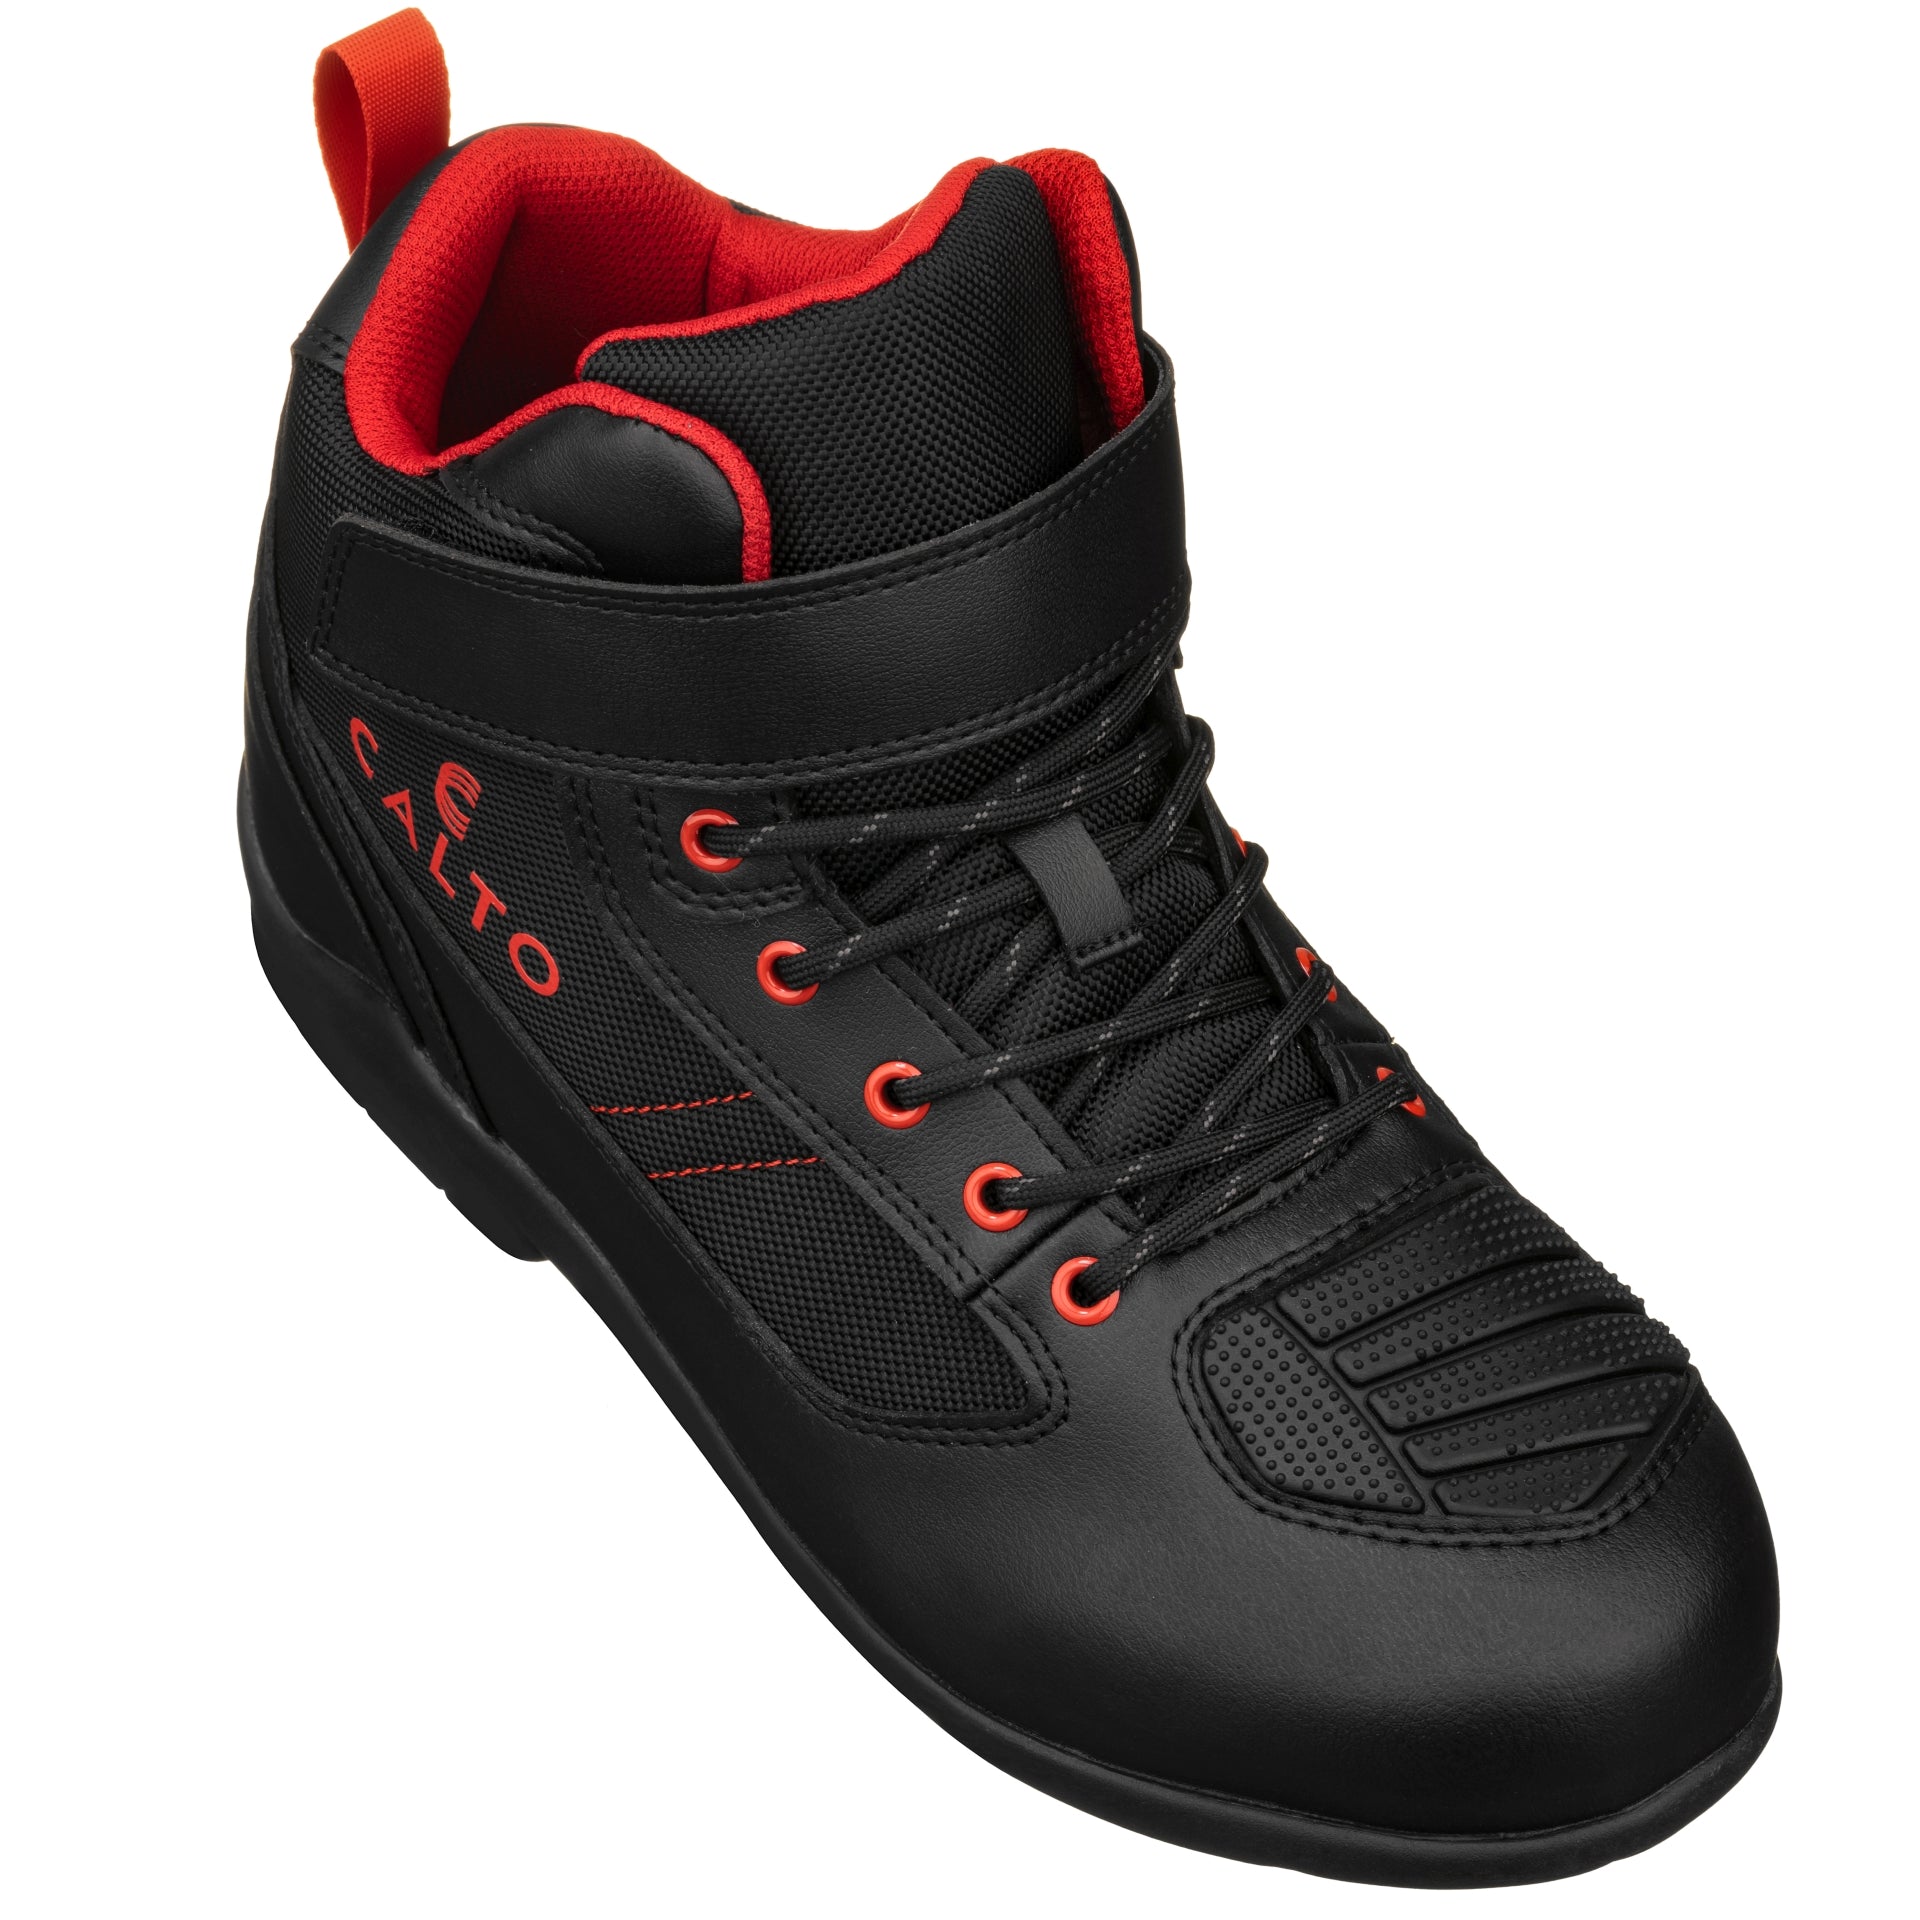 CALTO - S4039 - 3.2 Inches Taller (Black/Red) - Motorcycle Boots